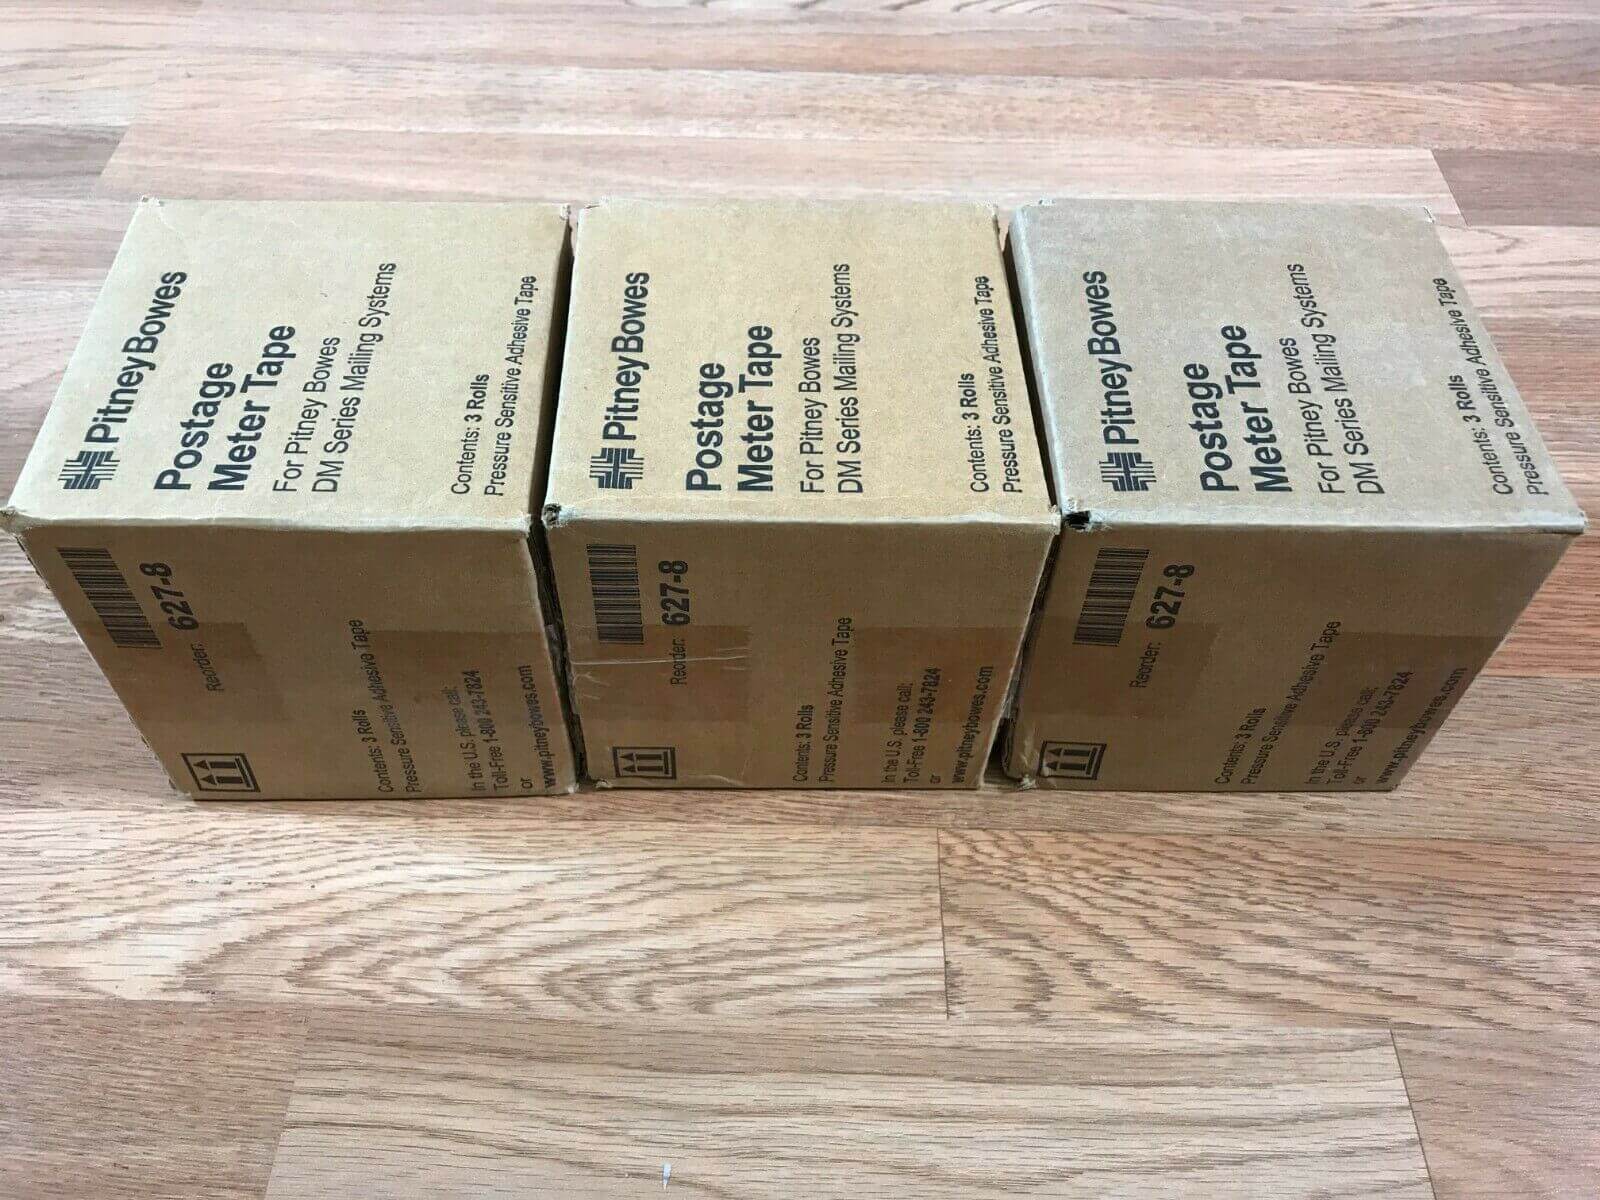 3 NEW IN BOX Pitney Bowes Postage Meter Tape 627-8 (3 Rolls Each) Same Day Ship! - copier-clearance-center